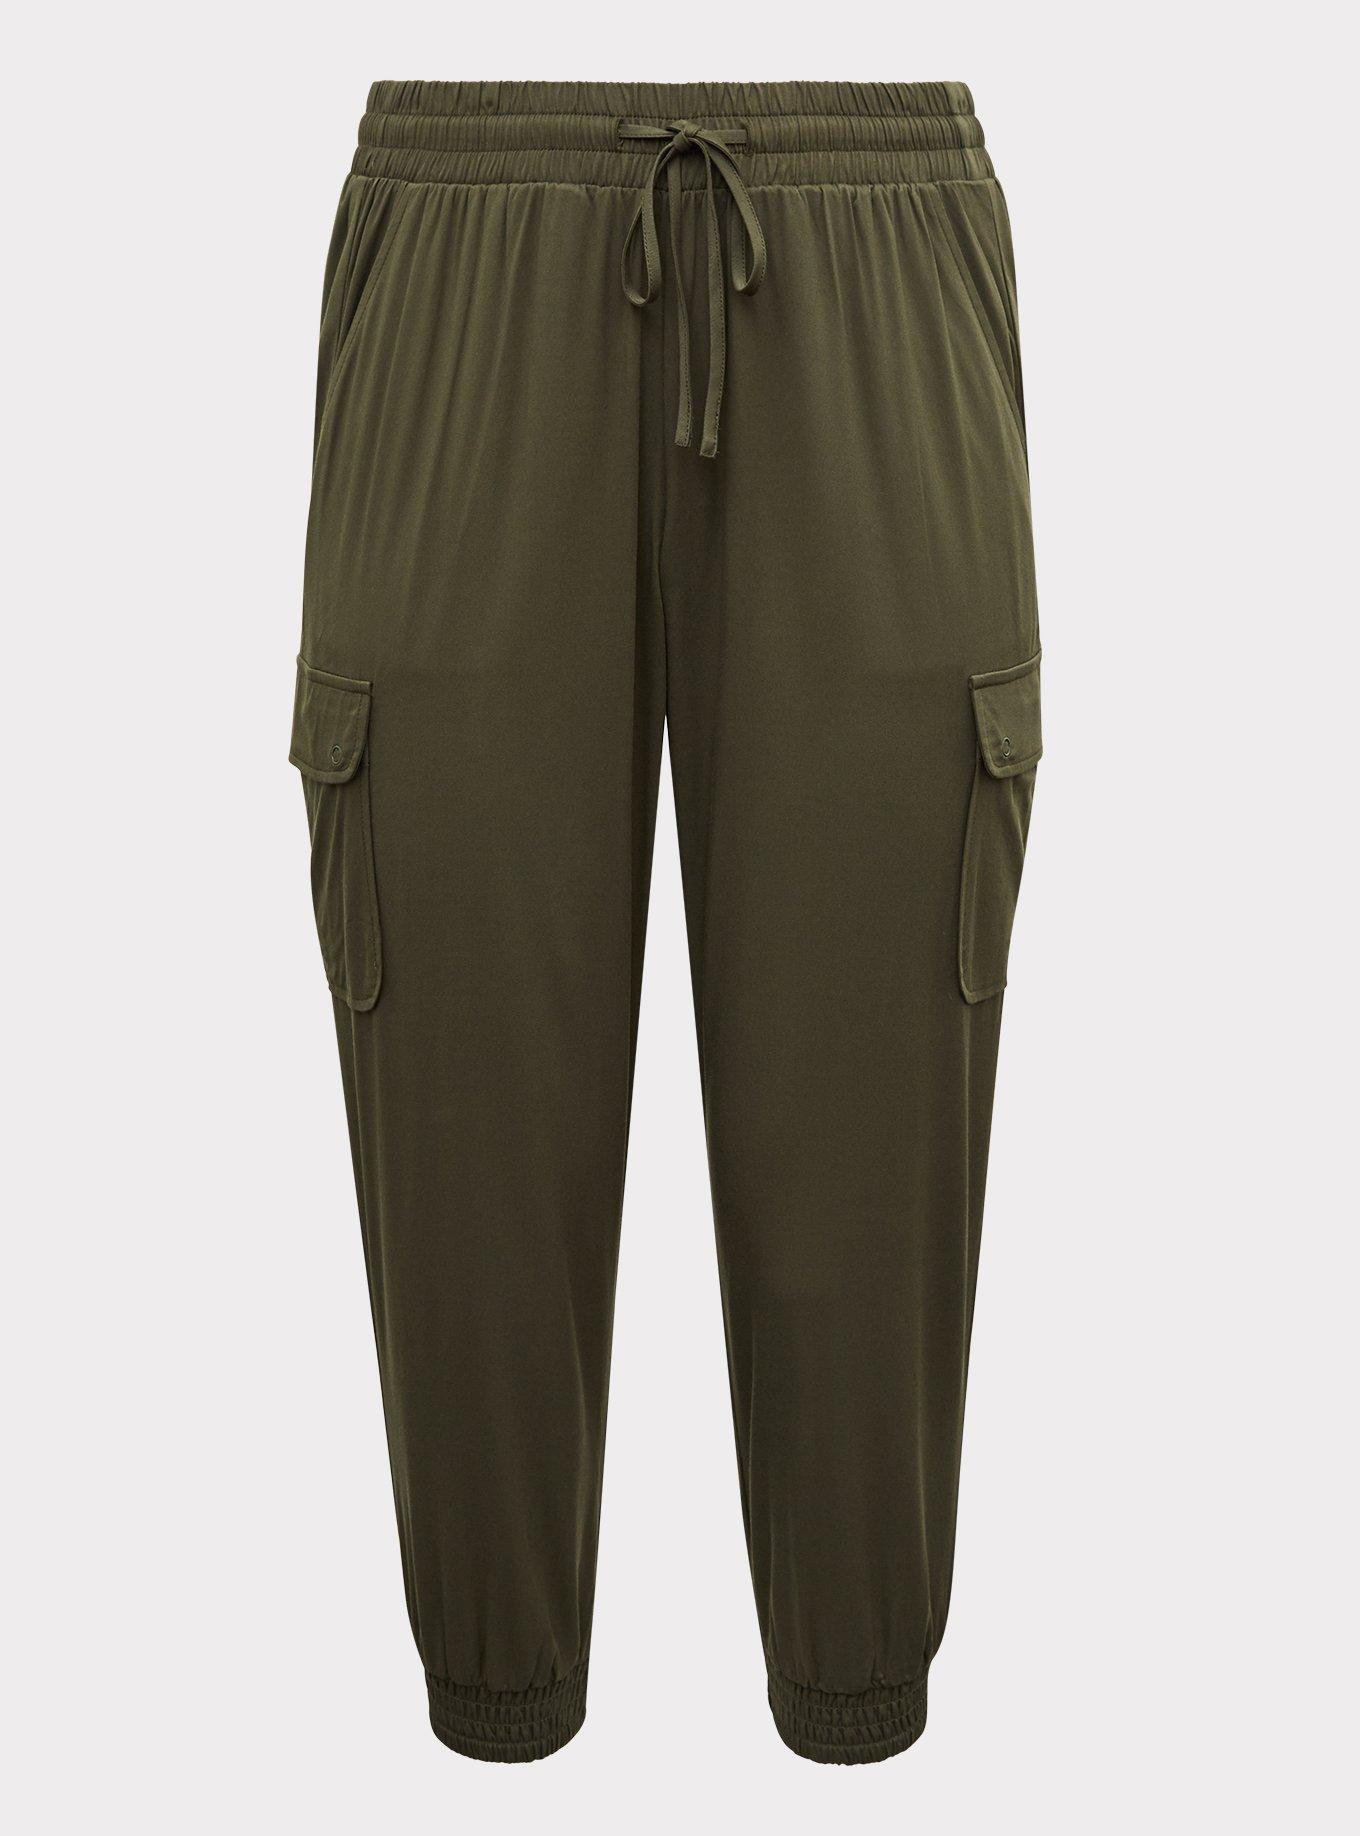 Hills &Clouds; Classic Light Weight Joggers (Olive Green) - Hills